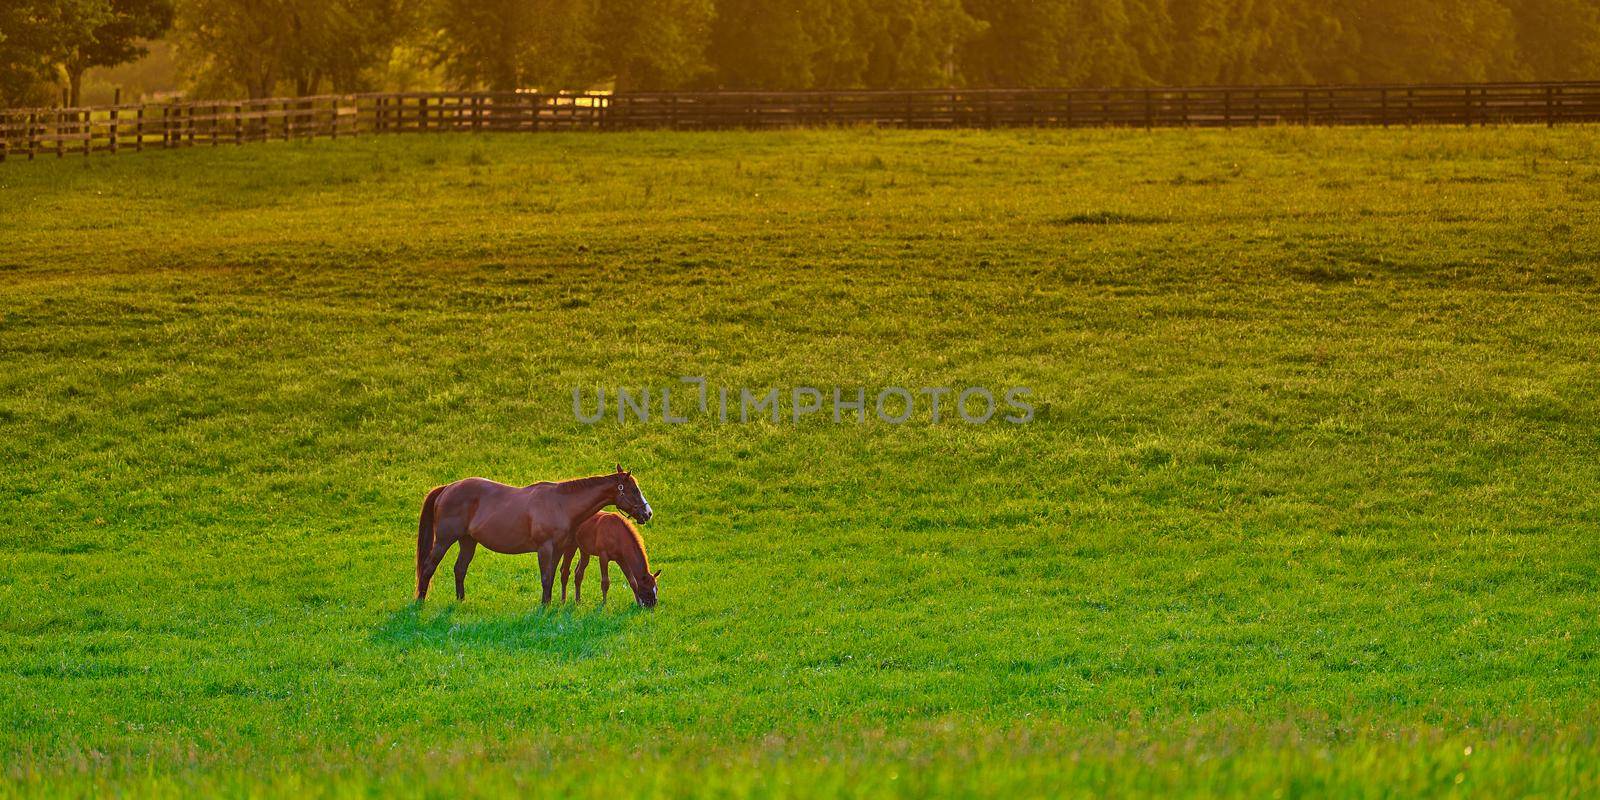 Mare and foal grazing on fresh green grass at sunset.